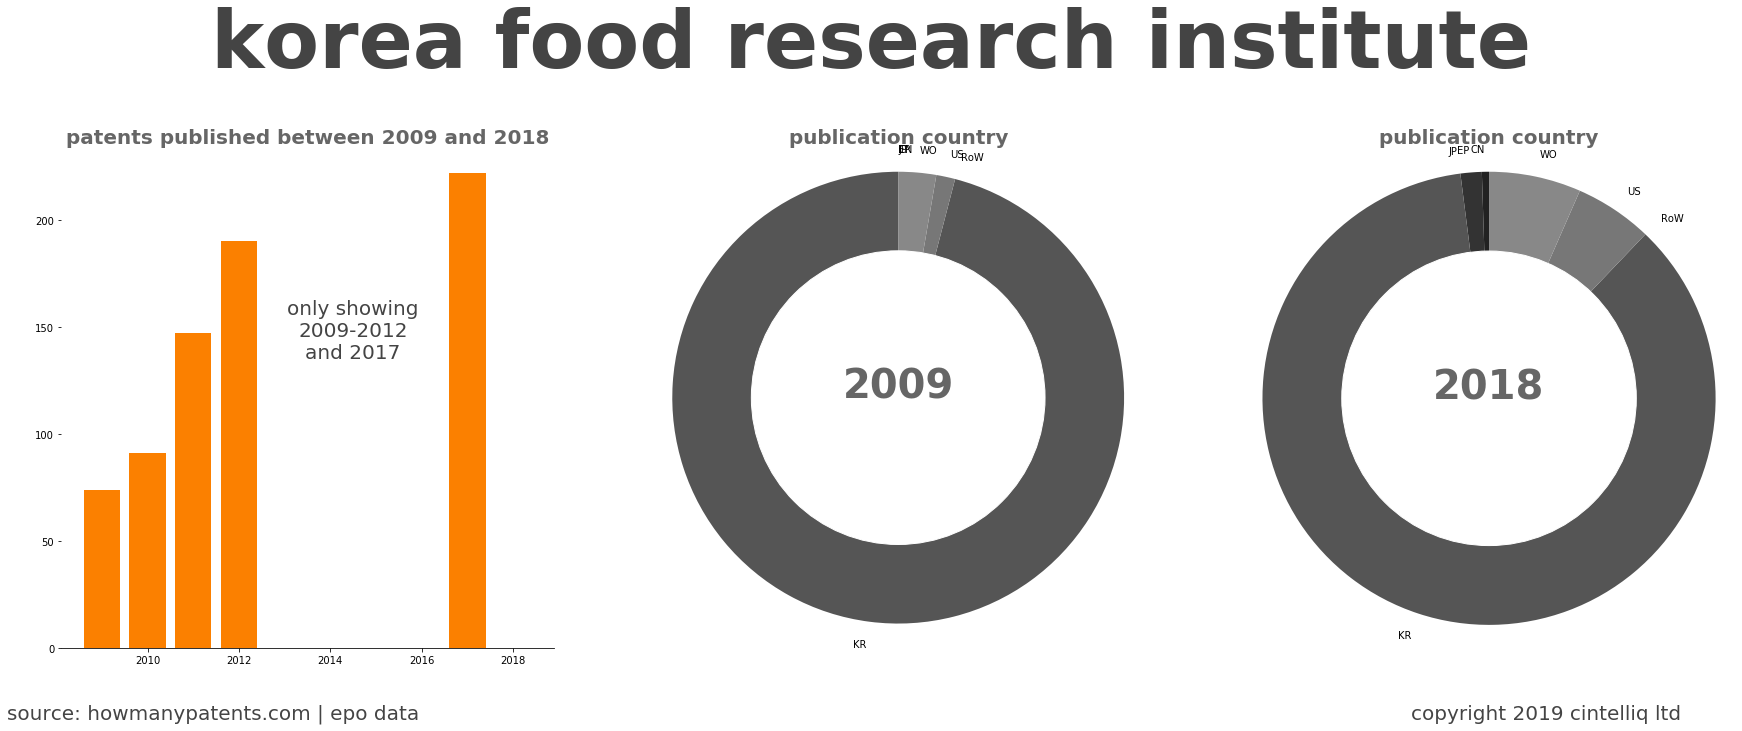 summary of patents for Korea Food Research Institute